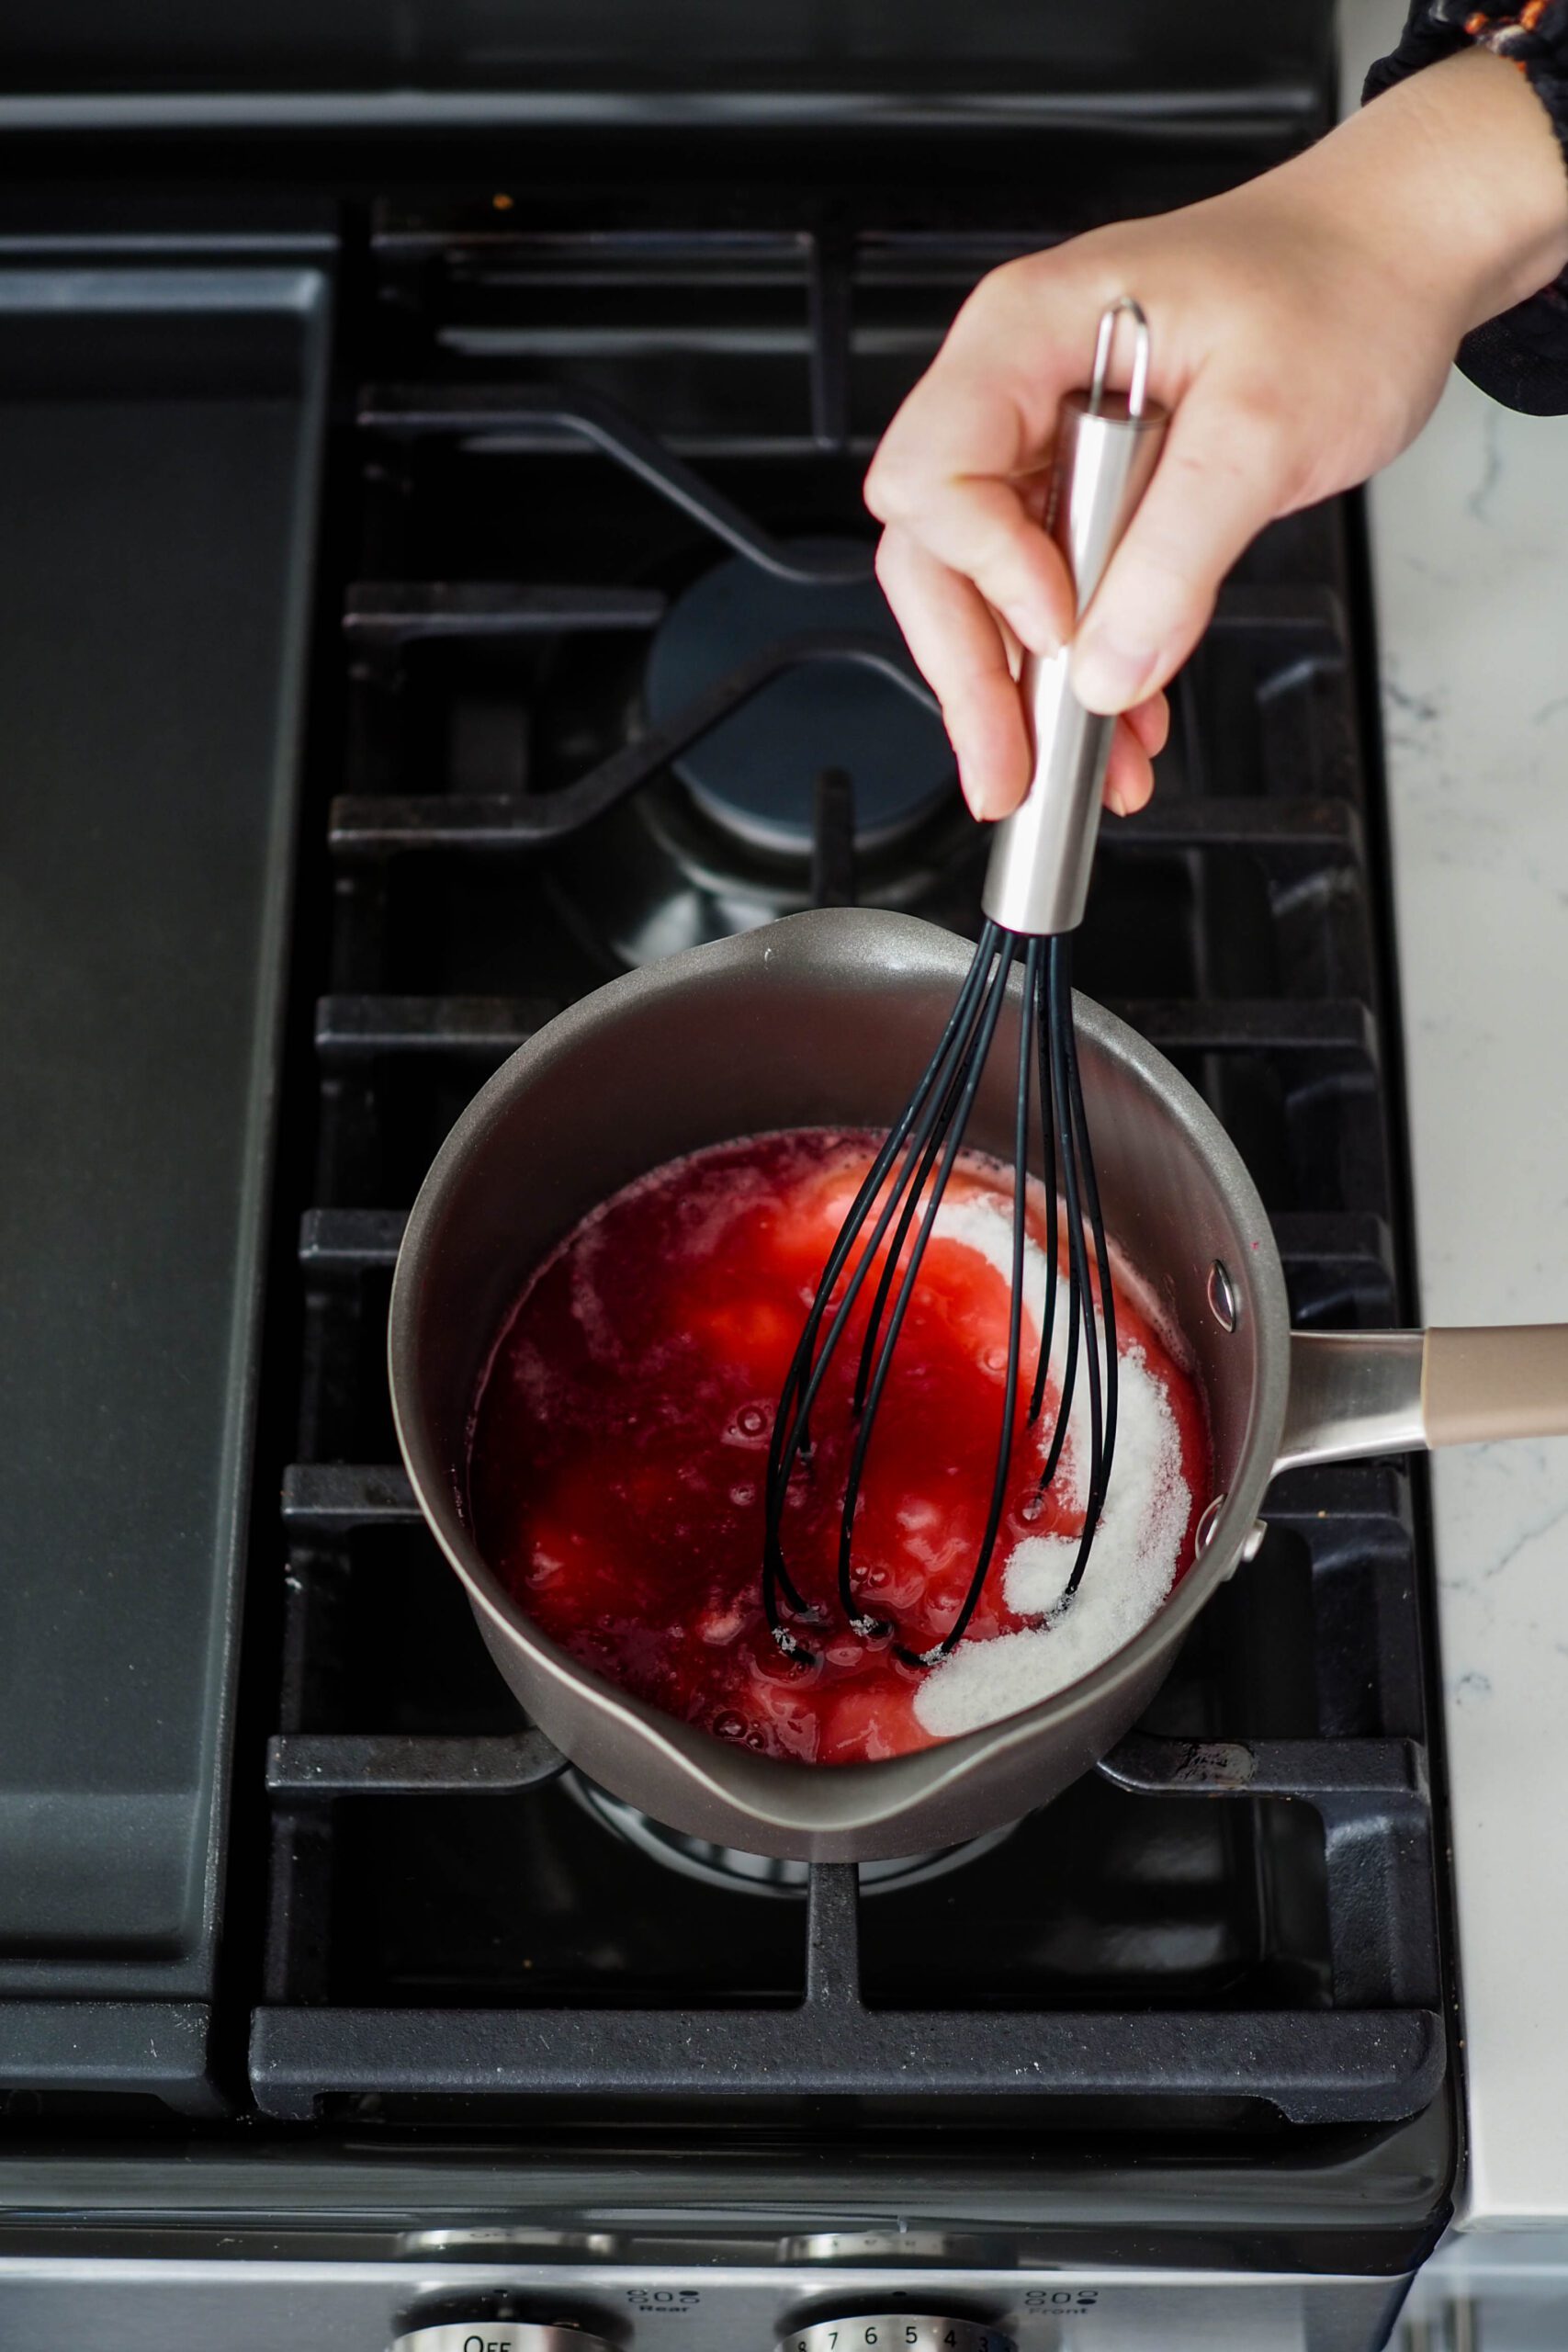 A whisk stirs sugar into pomegranate jam over the stove.